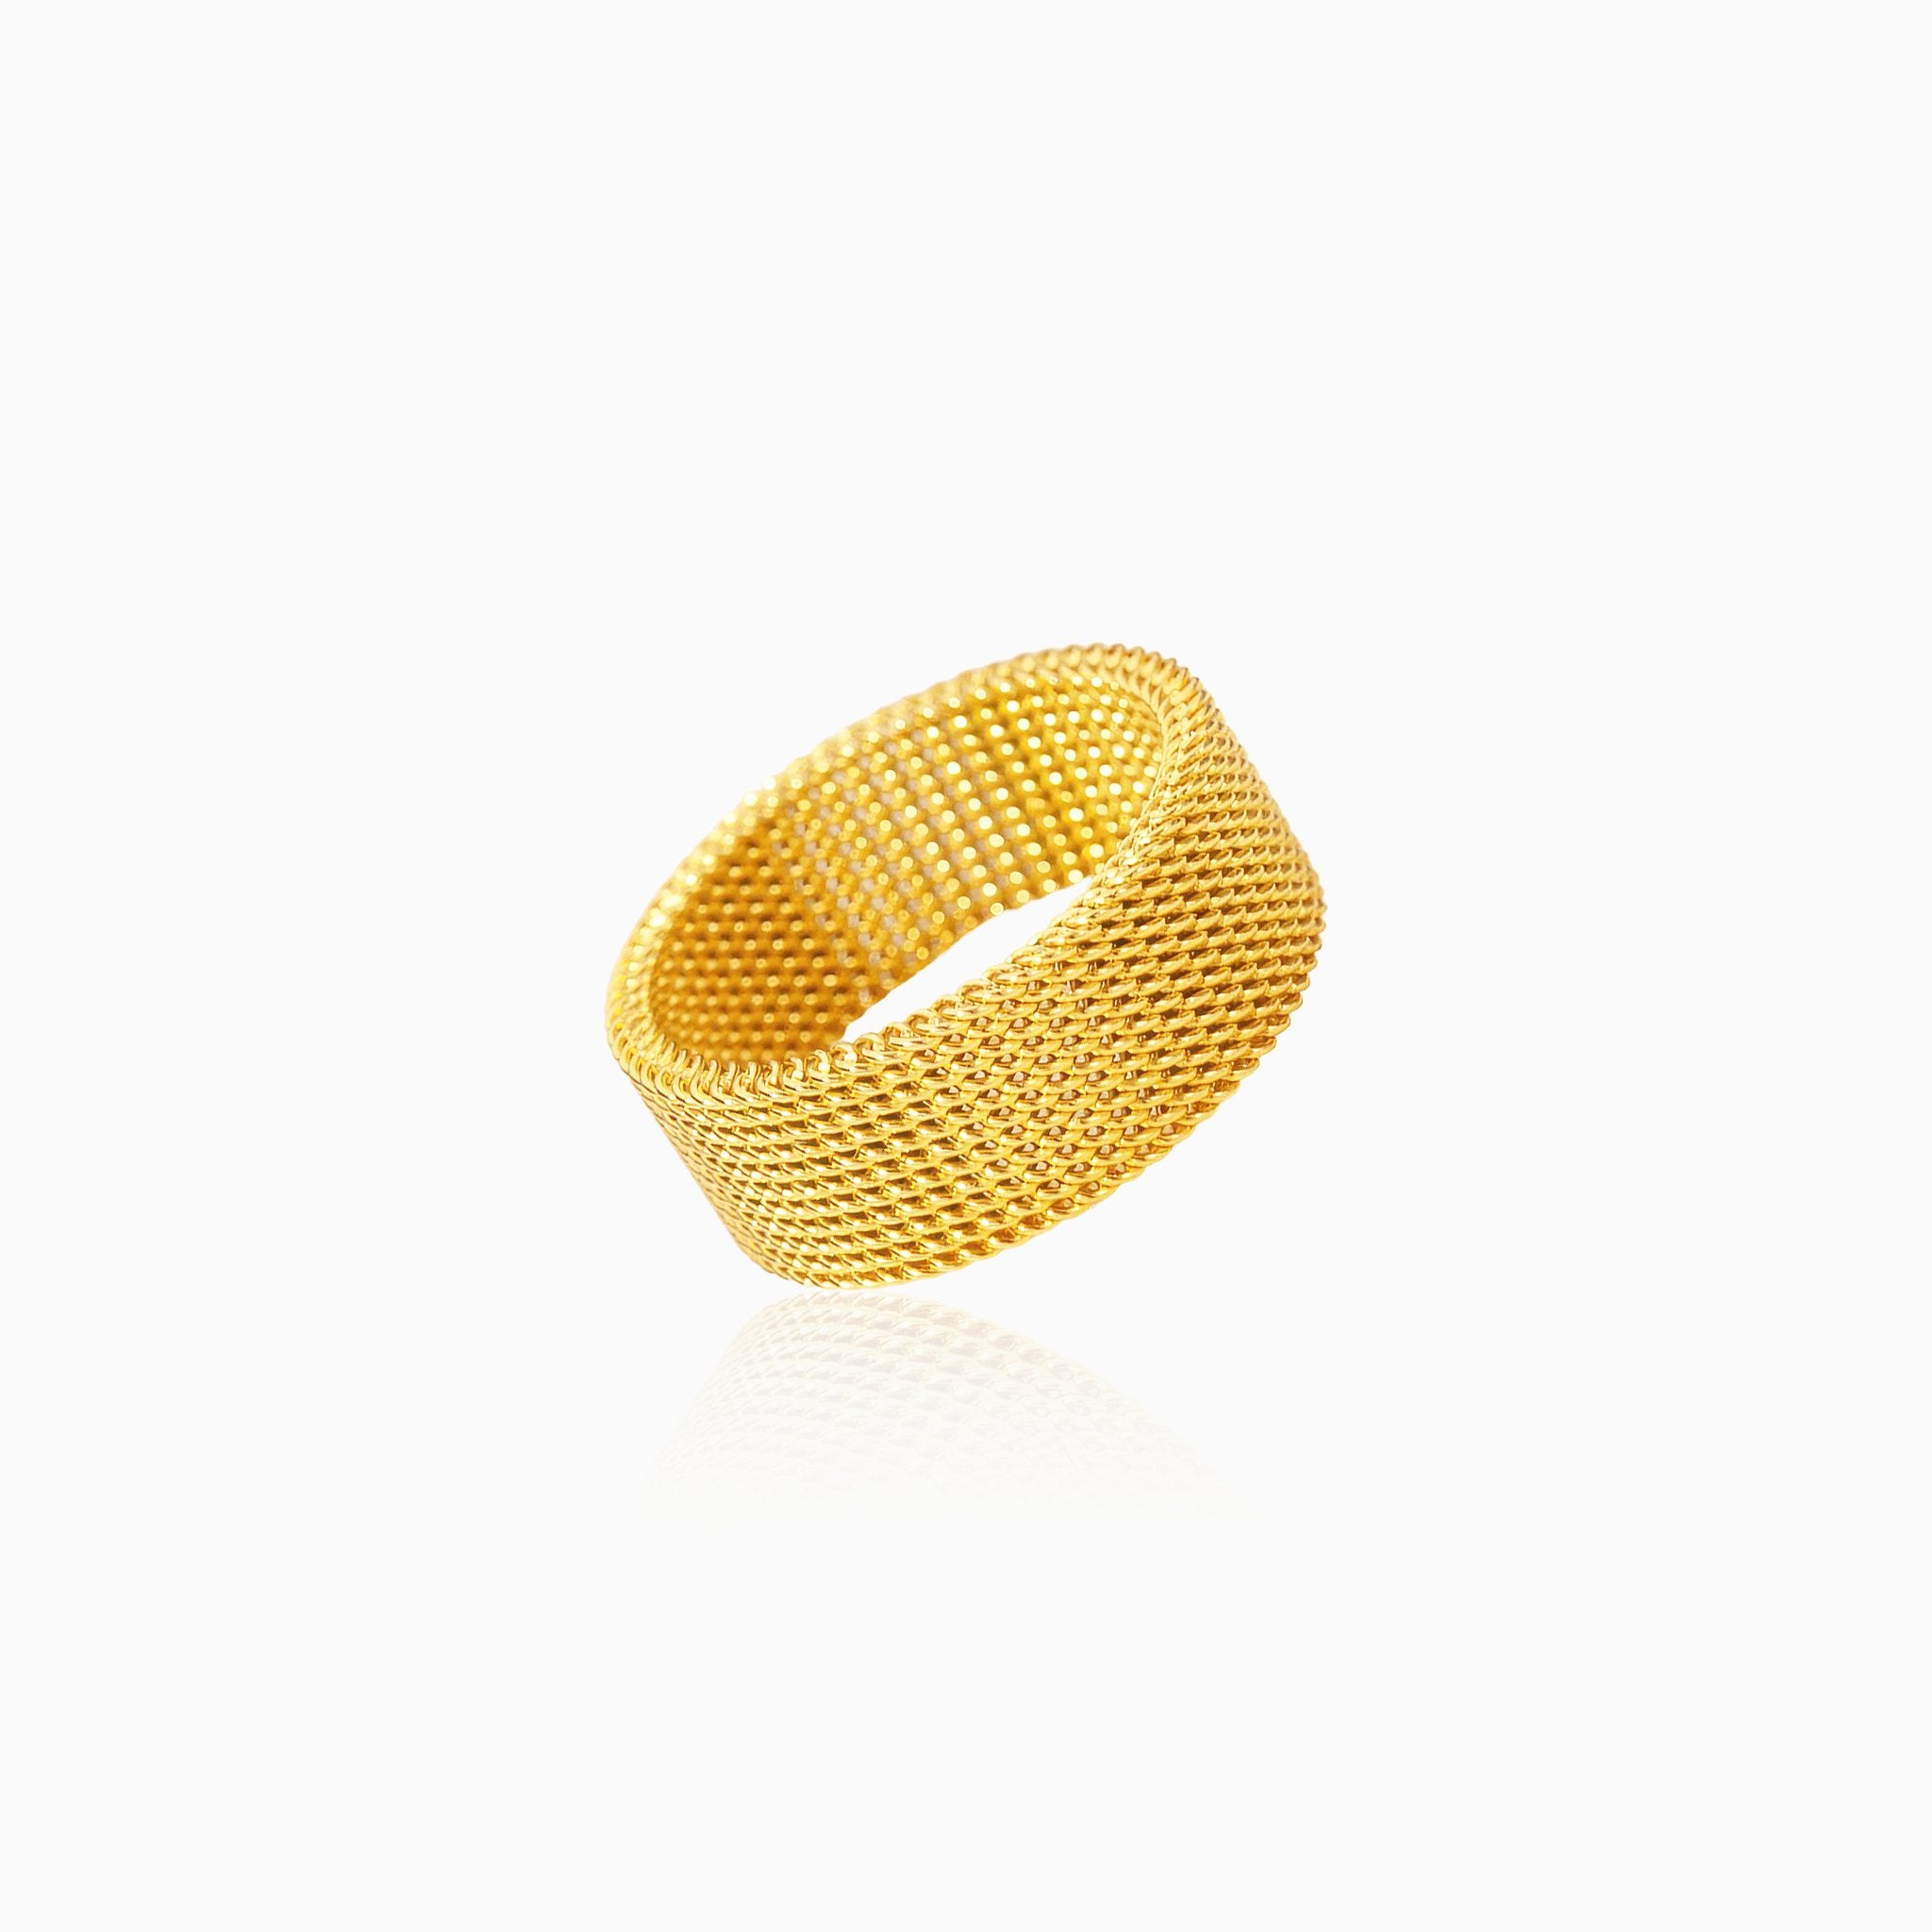 Intricate Woven Design Ring - Nobbier - Ring - 18K Gold And Titanium PVD Coated Jewelry